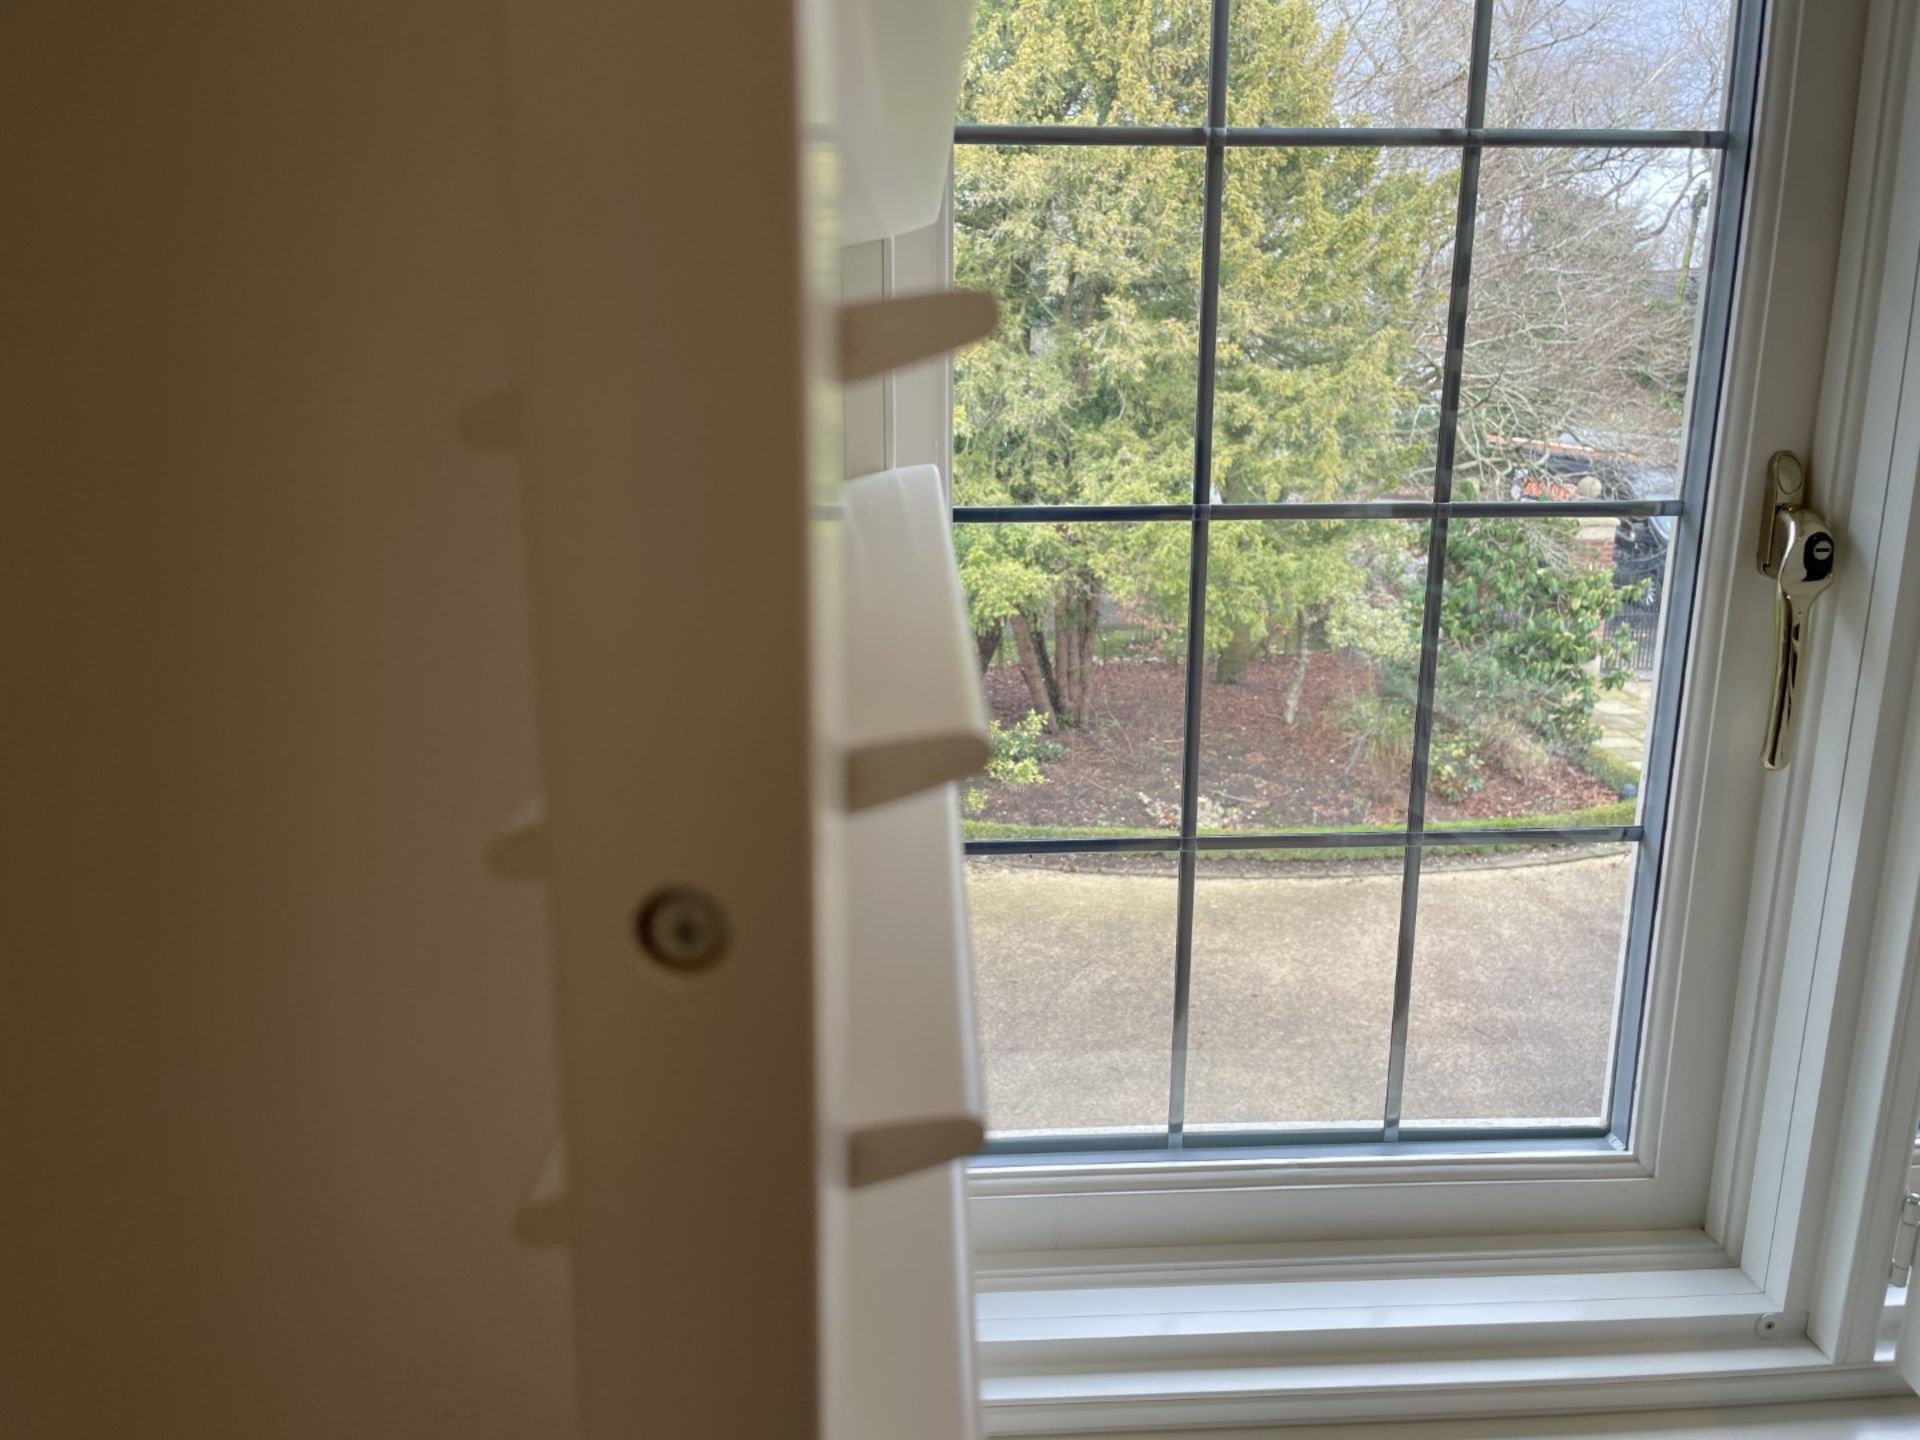 1 x Hardwood Timber Double Glazed Leaded 3-Pane Window Frame fitted with Shutter Blinds - Image 4 of 17